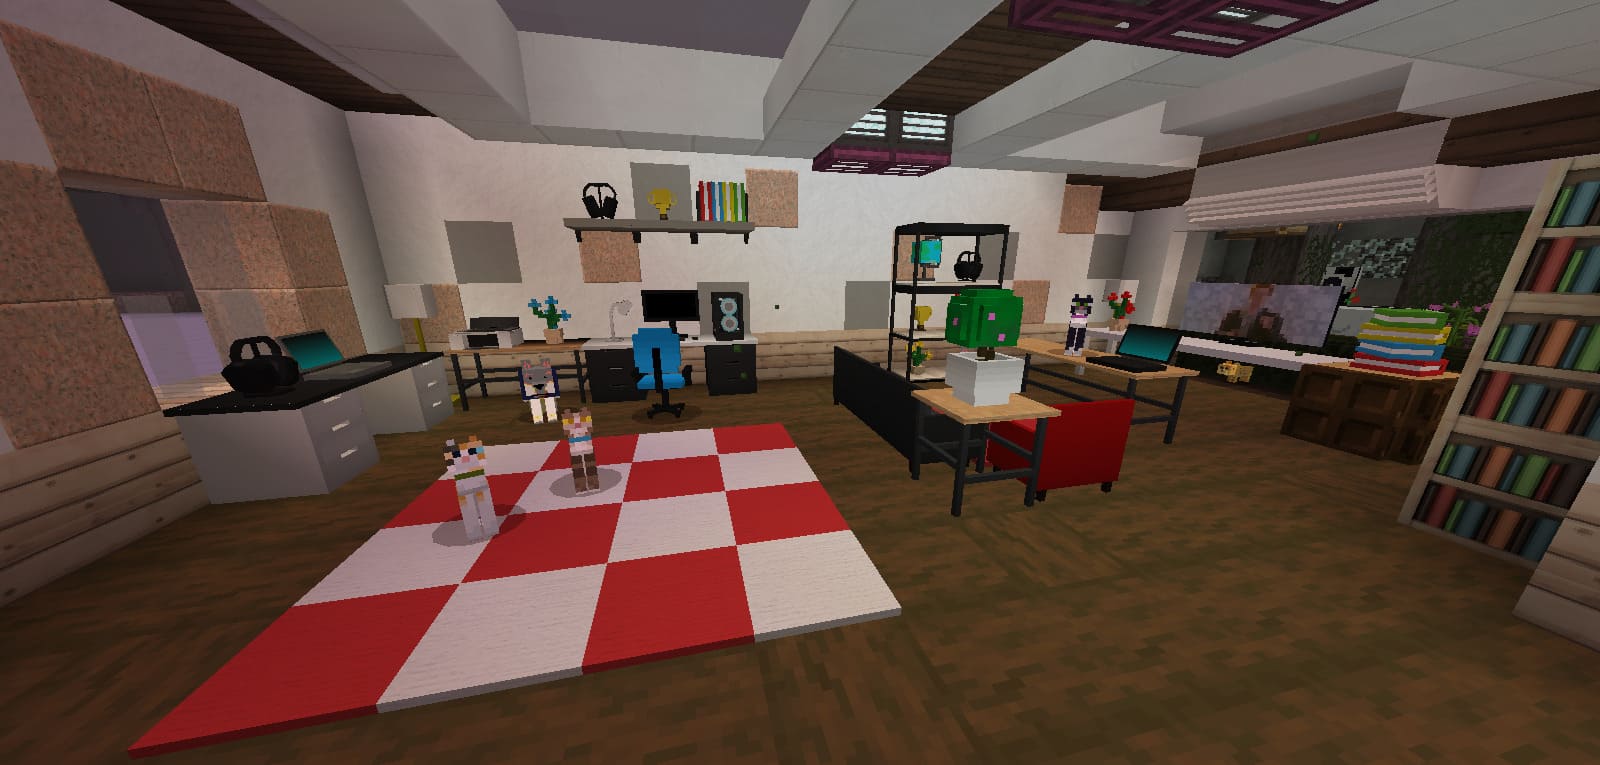 Example of a room with furniture Minecraft